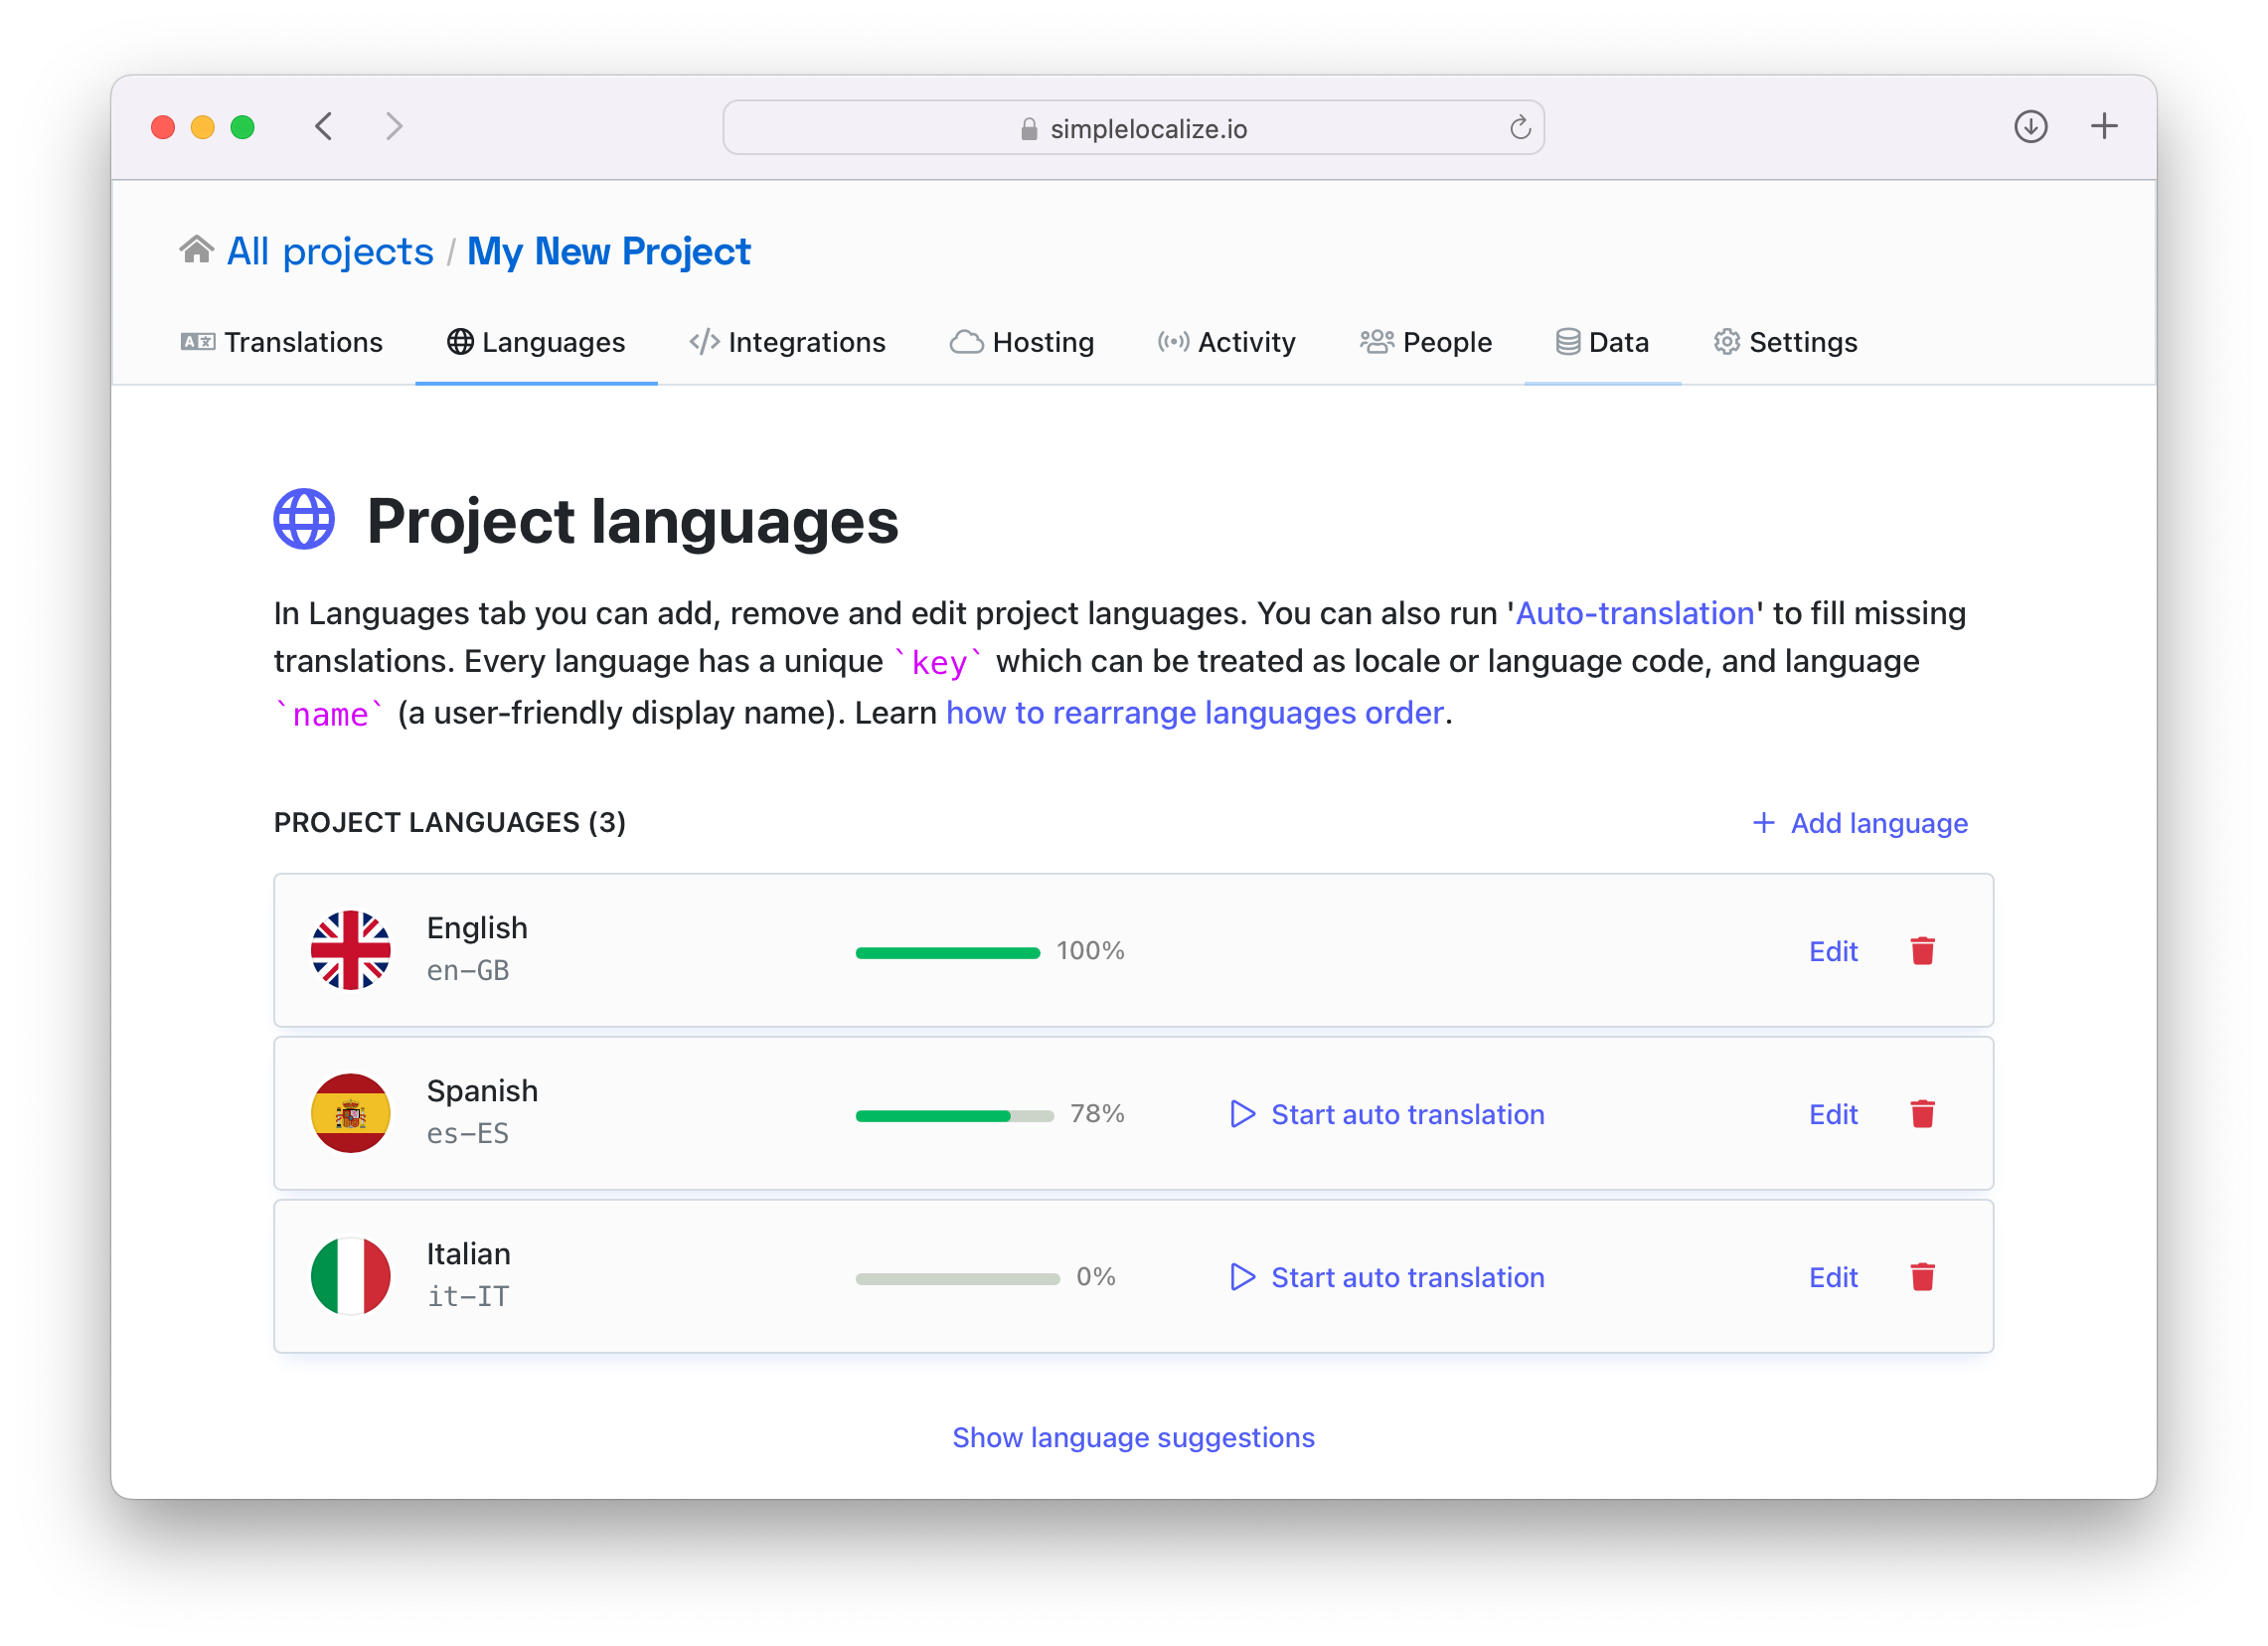 Add new languages to your application